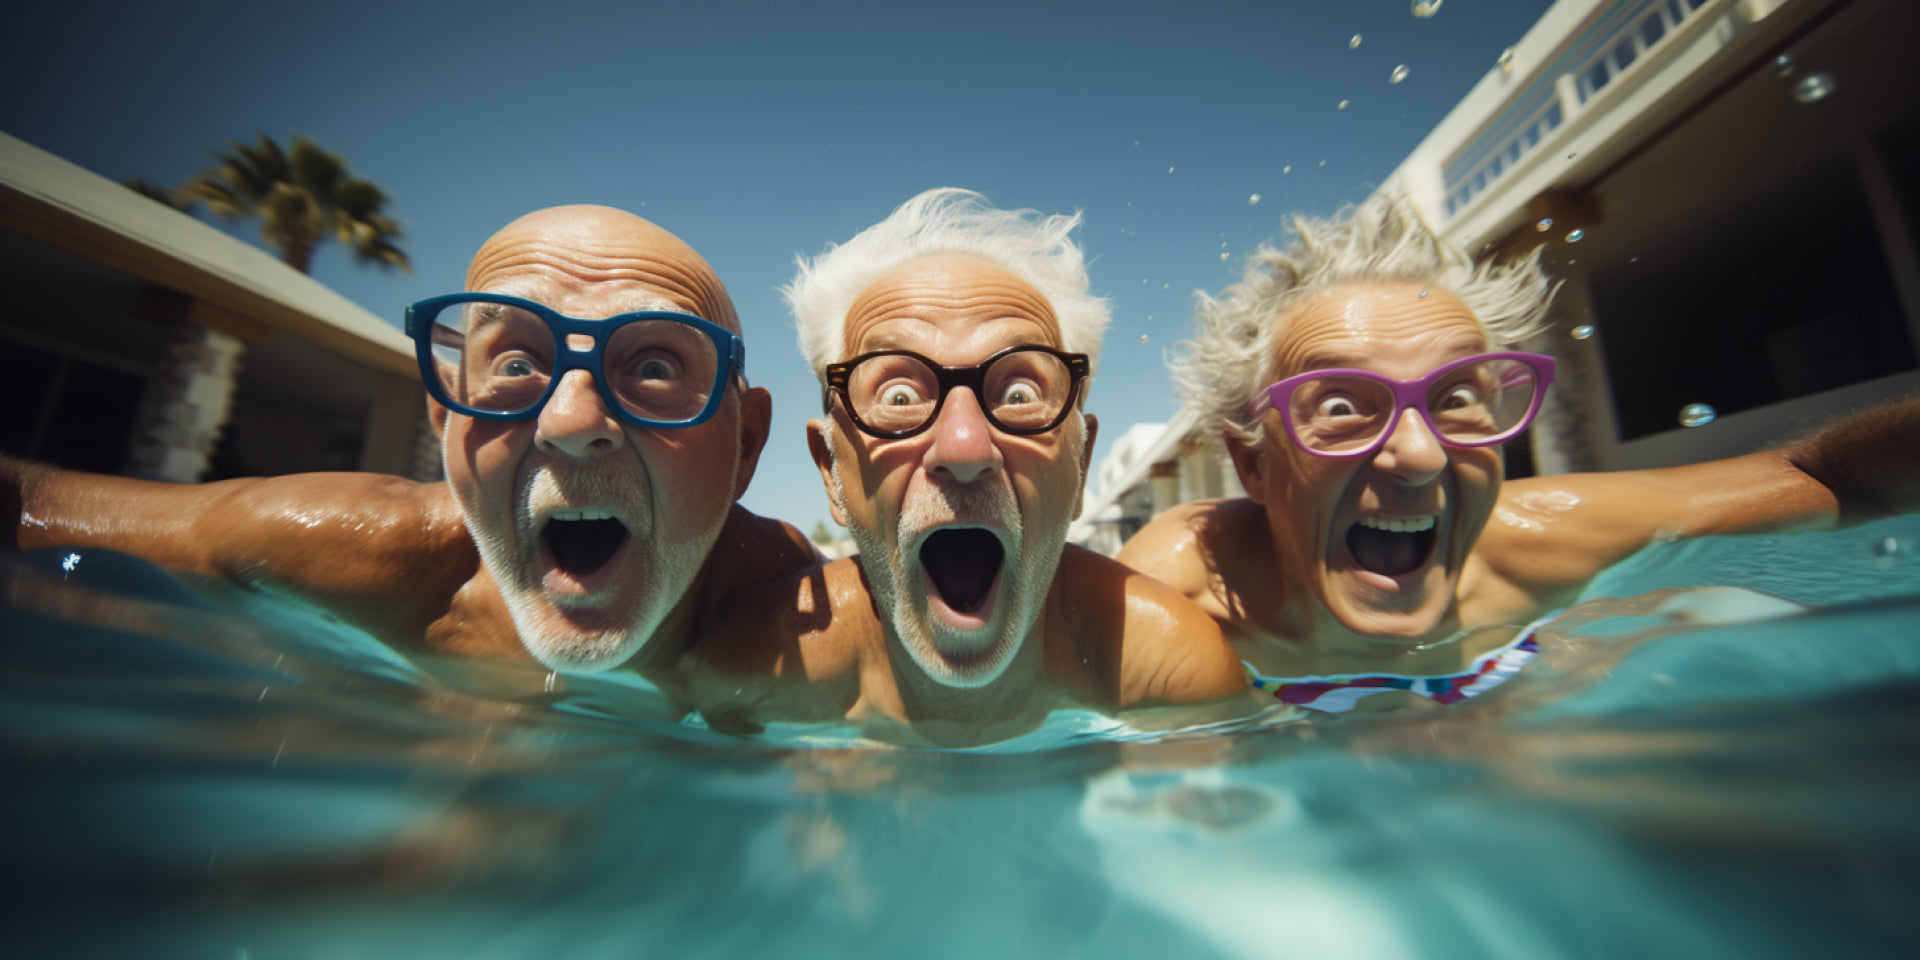 3 grandparents goofying around inside the pool